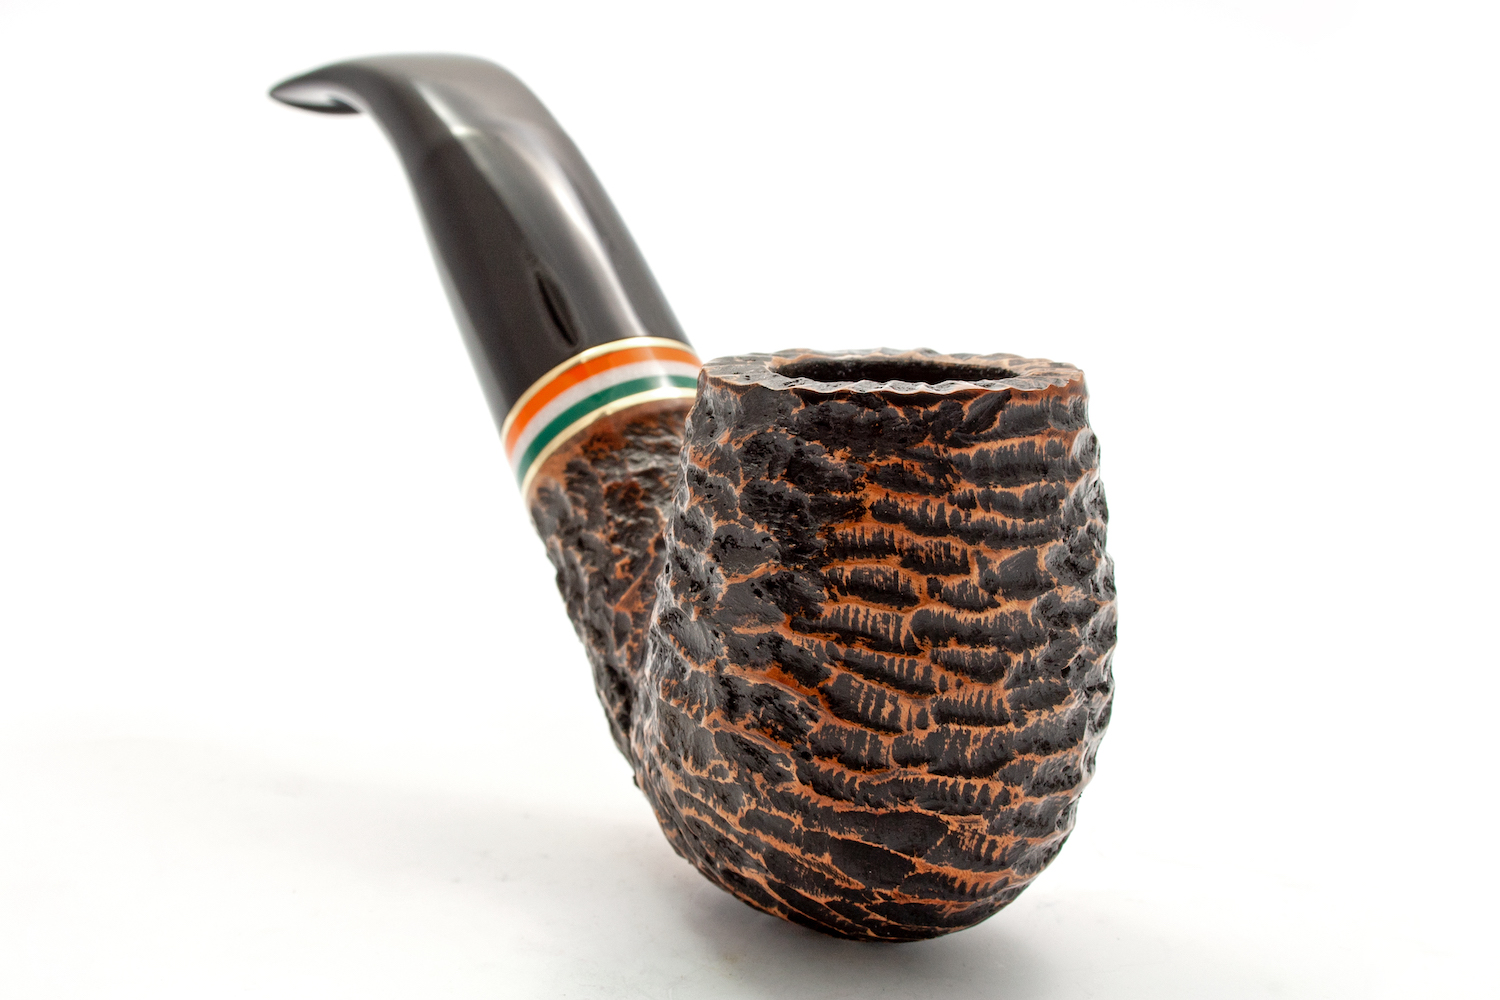 Peterson St. Patrick's Day 23 Rustic - XL90